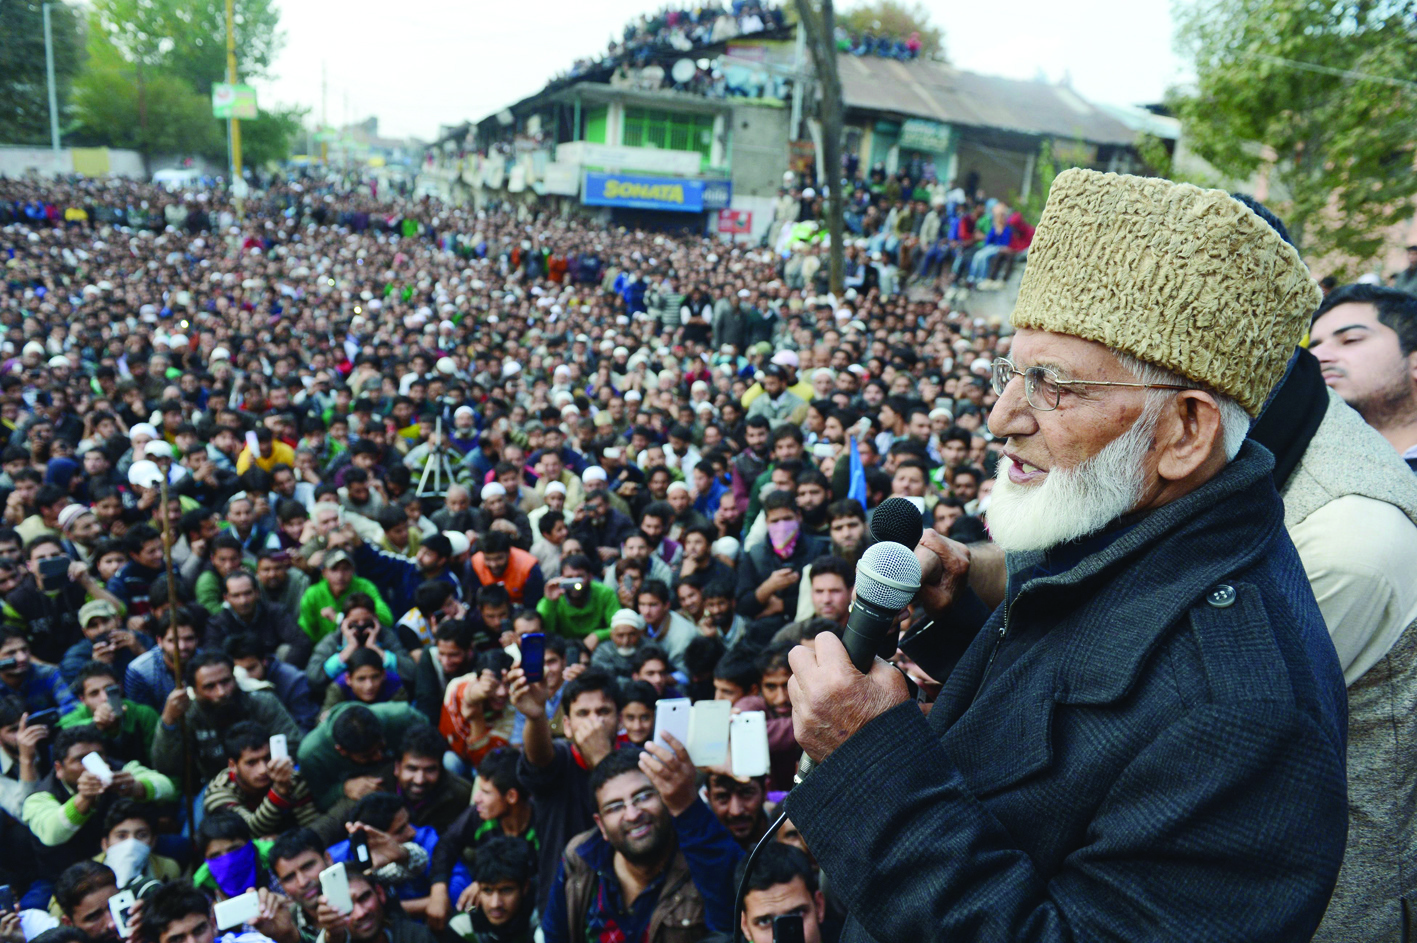 KASHMIR: In this file photo, Kashmiri separatist leader Syed Ali Shah Geelani addresses a public rally in Sopore, about 48 kms northwest of the capital Srinagar. Indian authorities imposed a security clampdown in disputed Kashmir late September 1, 2021, after the death of Geelani at the age of 92, residents said. —AFP